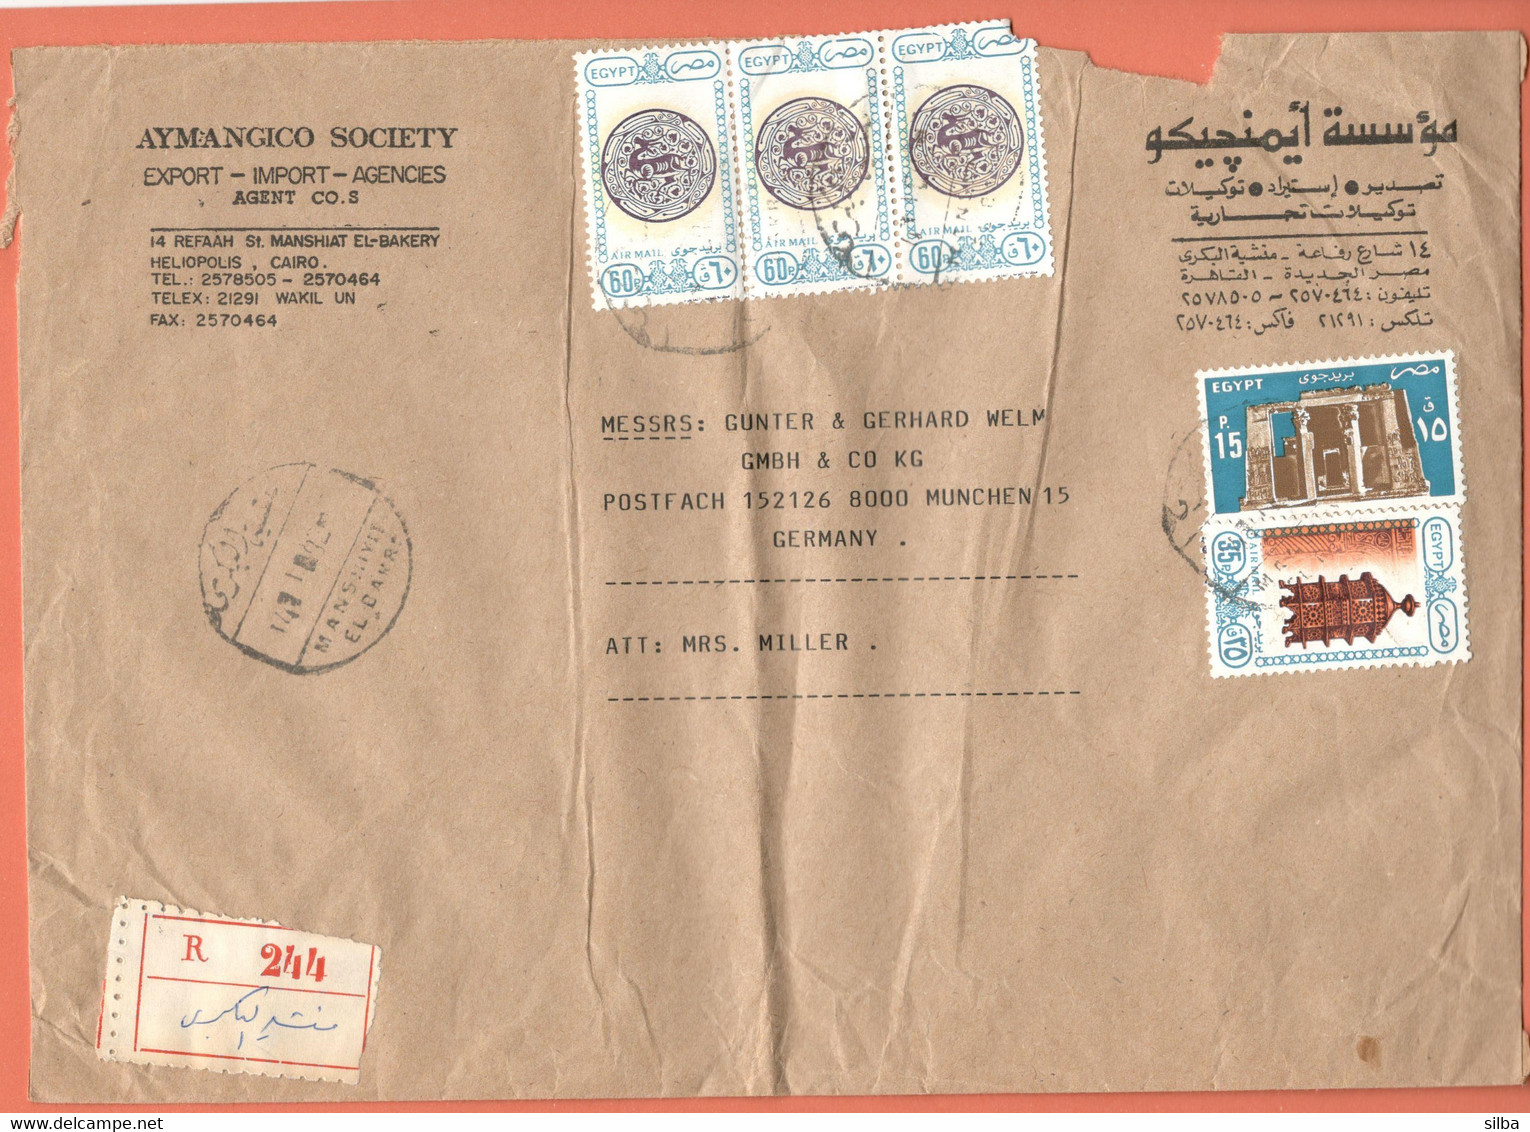 Egypt / Airmail - Art And Mosques, Lantern 35 P, Dish With Gazelle Motif - 60 P, 1989, Edfu Temple, 15 P, 1985 - Covers & Documents